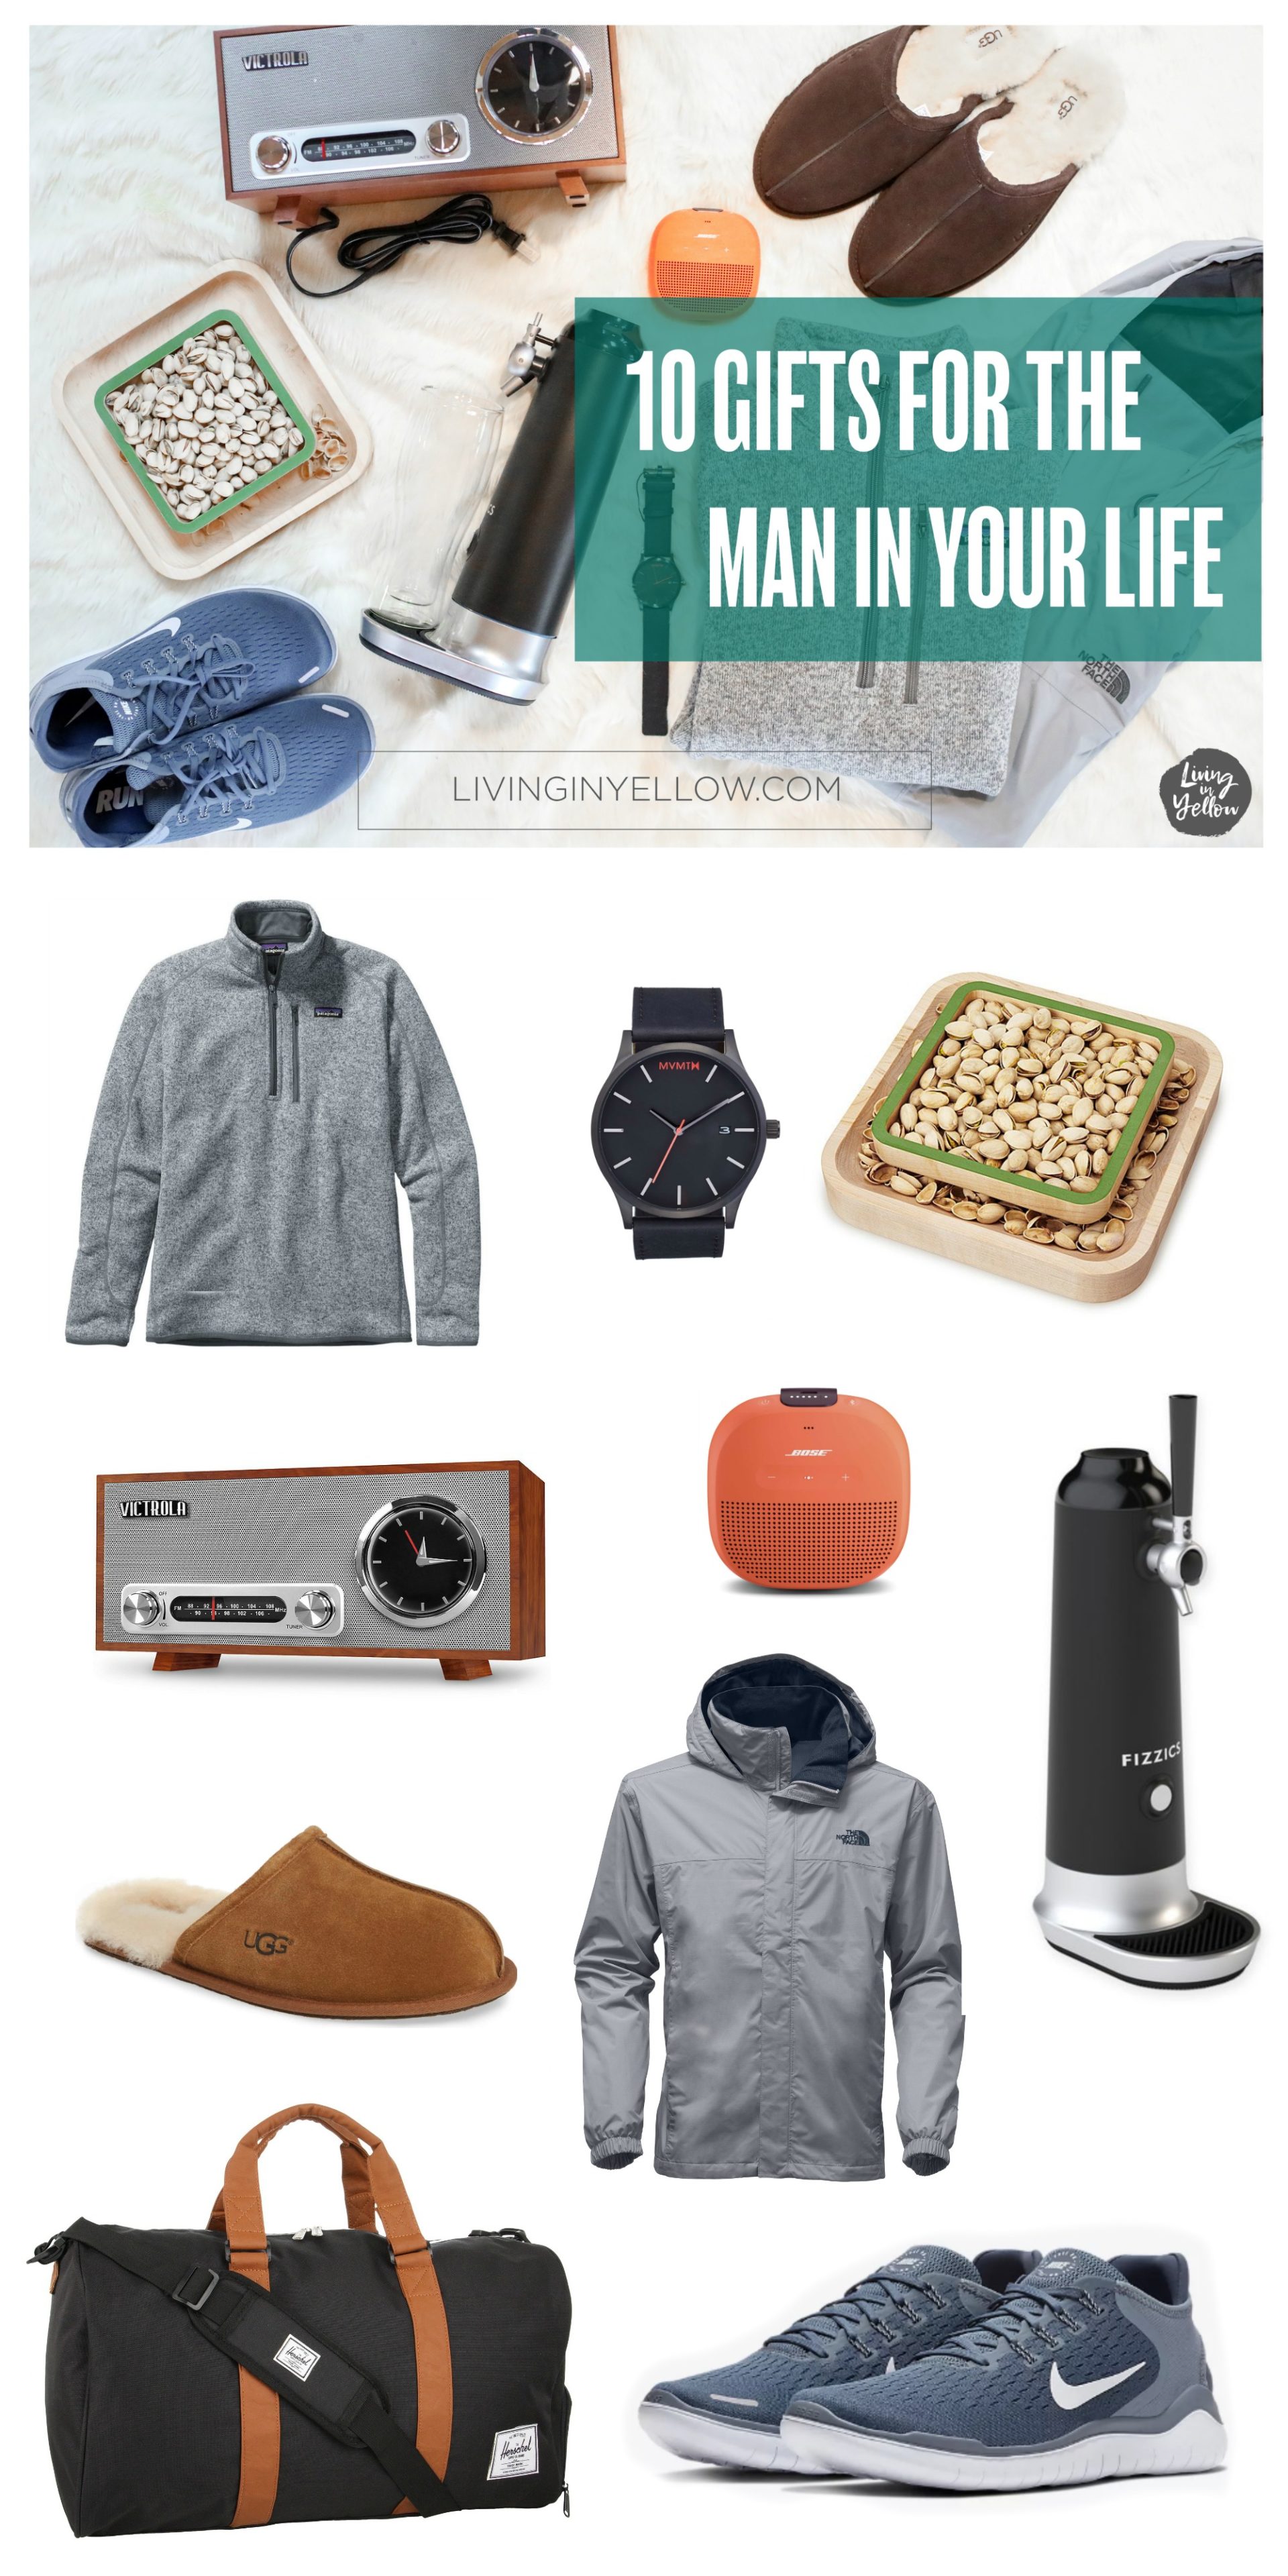 11 Gifts Under $100 Gifts For HIM - Living in Yellow  Mens birthday gifts,  Unique gifts for men, Surprise gifts for him